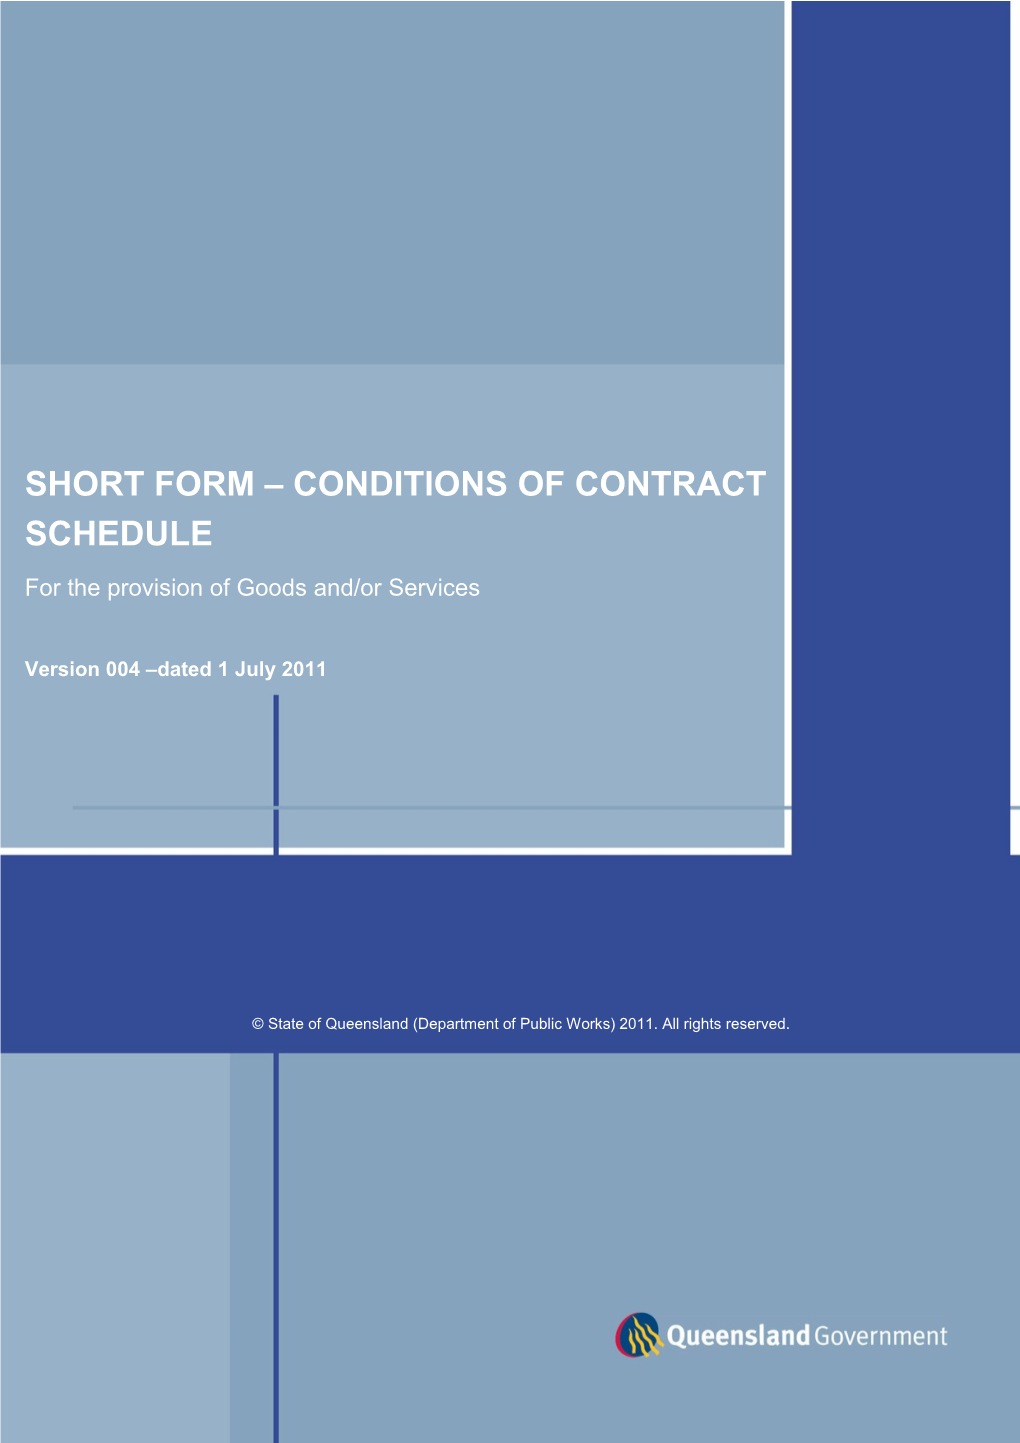 Short-Form Conditions of Contract Schedule